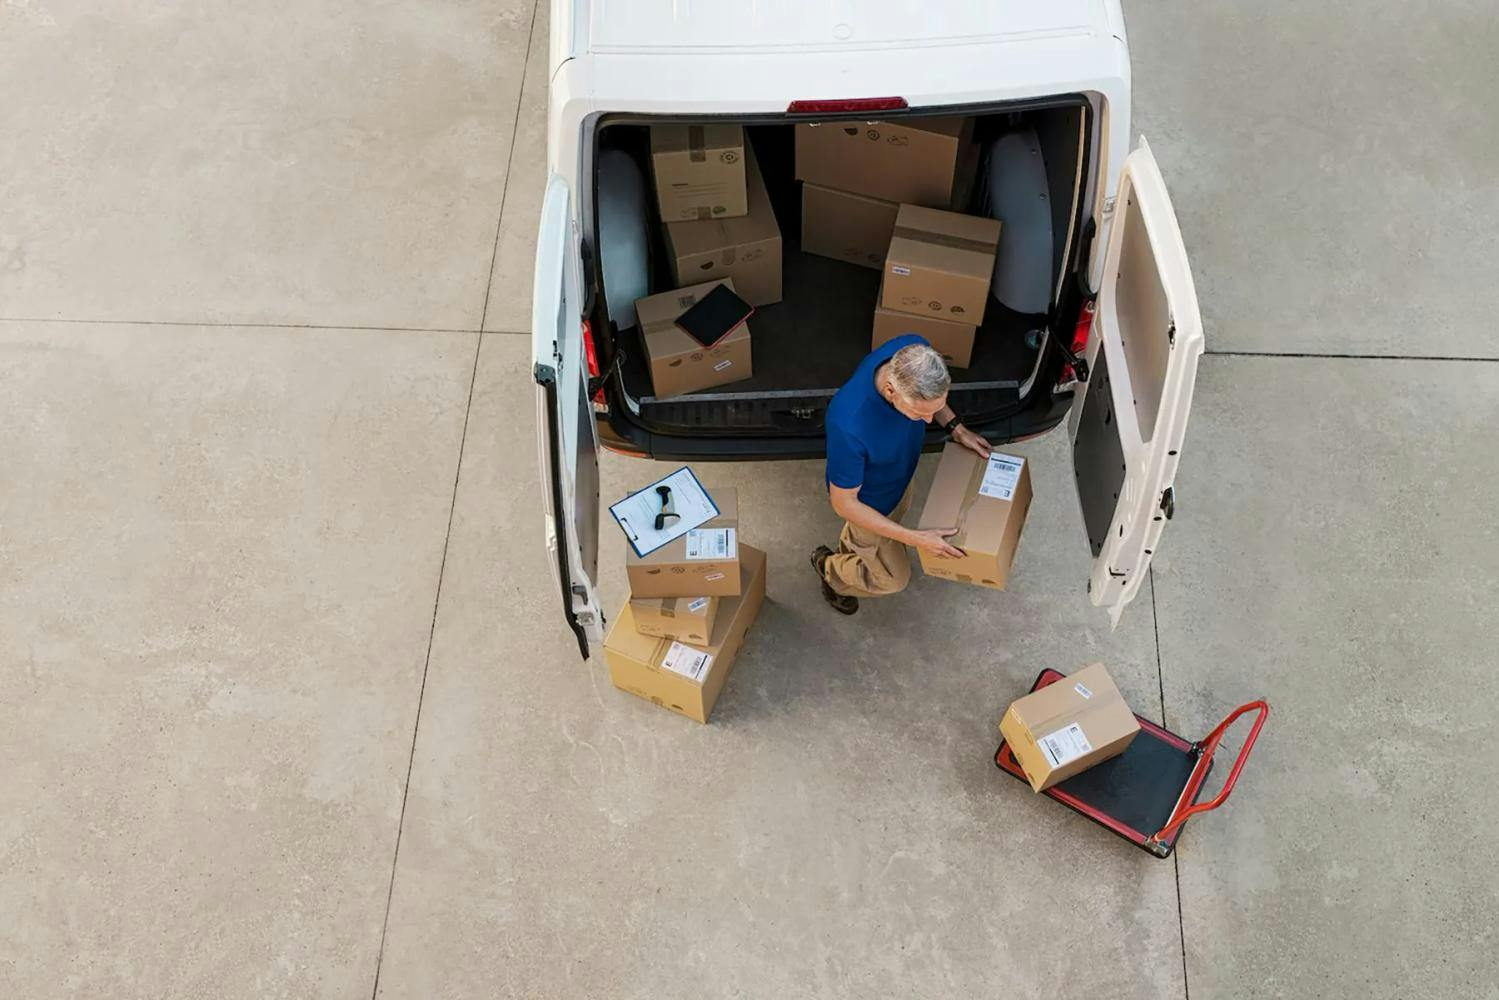 Courier unpacking parcels from delivery van